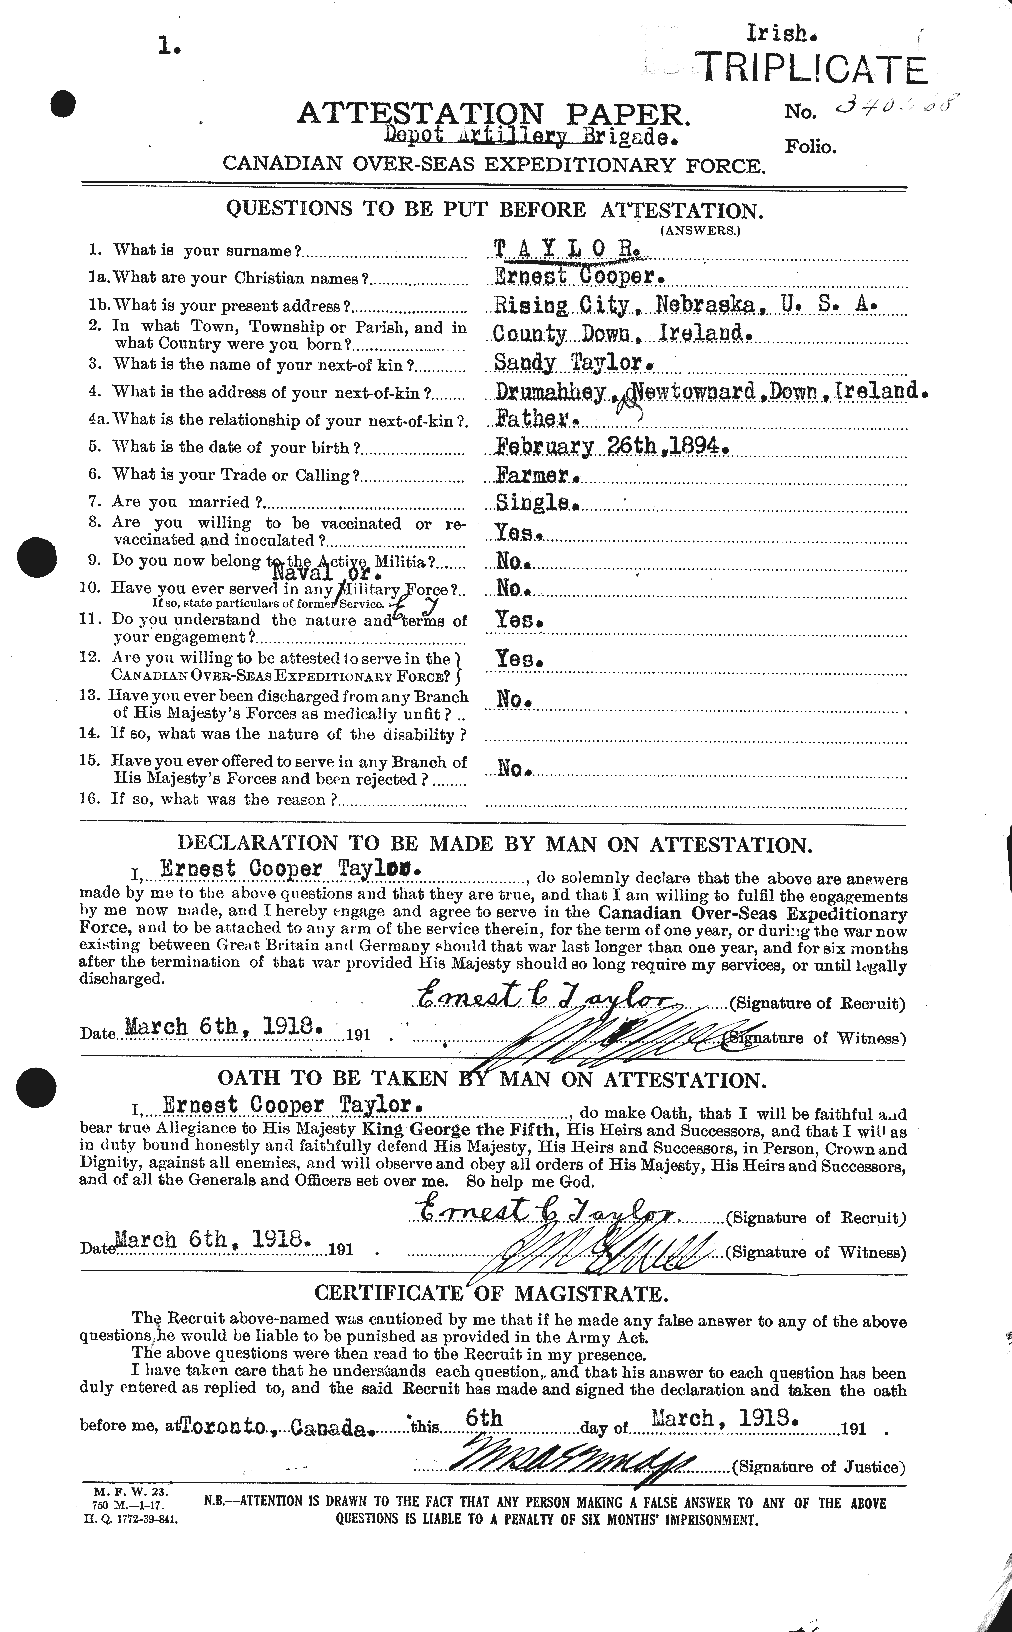 Personnel Records of the First World War - CEF 627389a